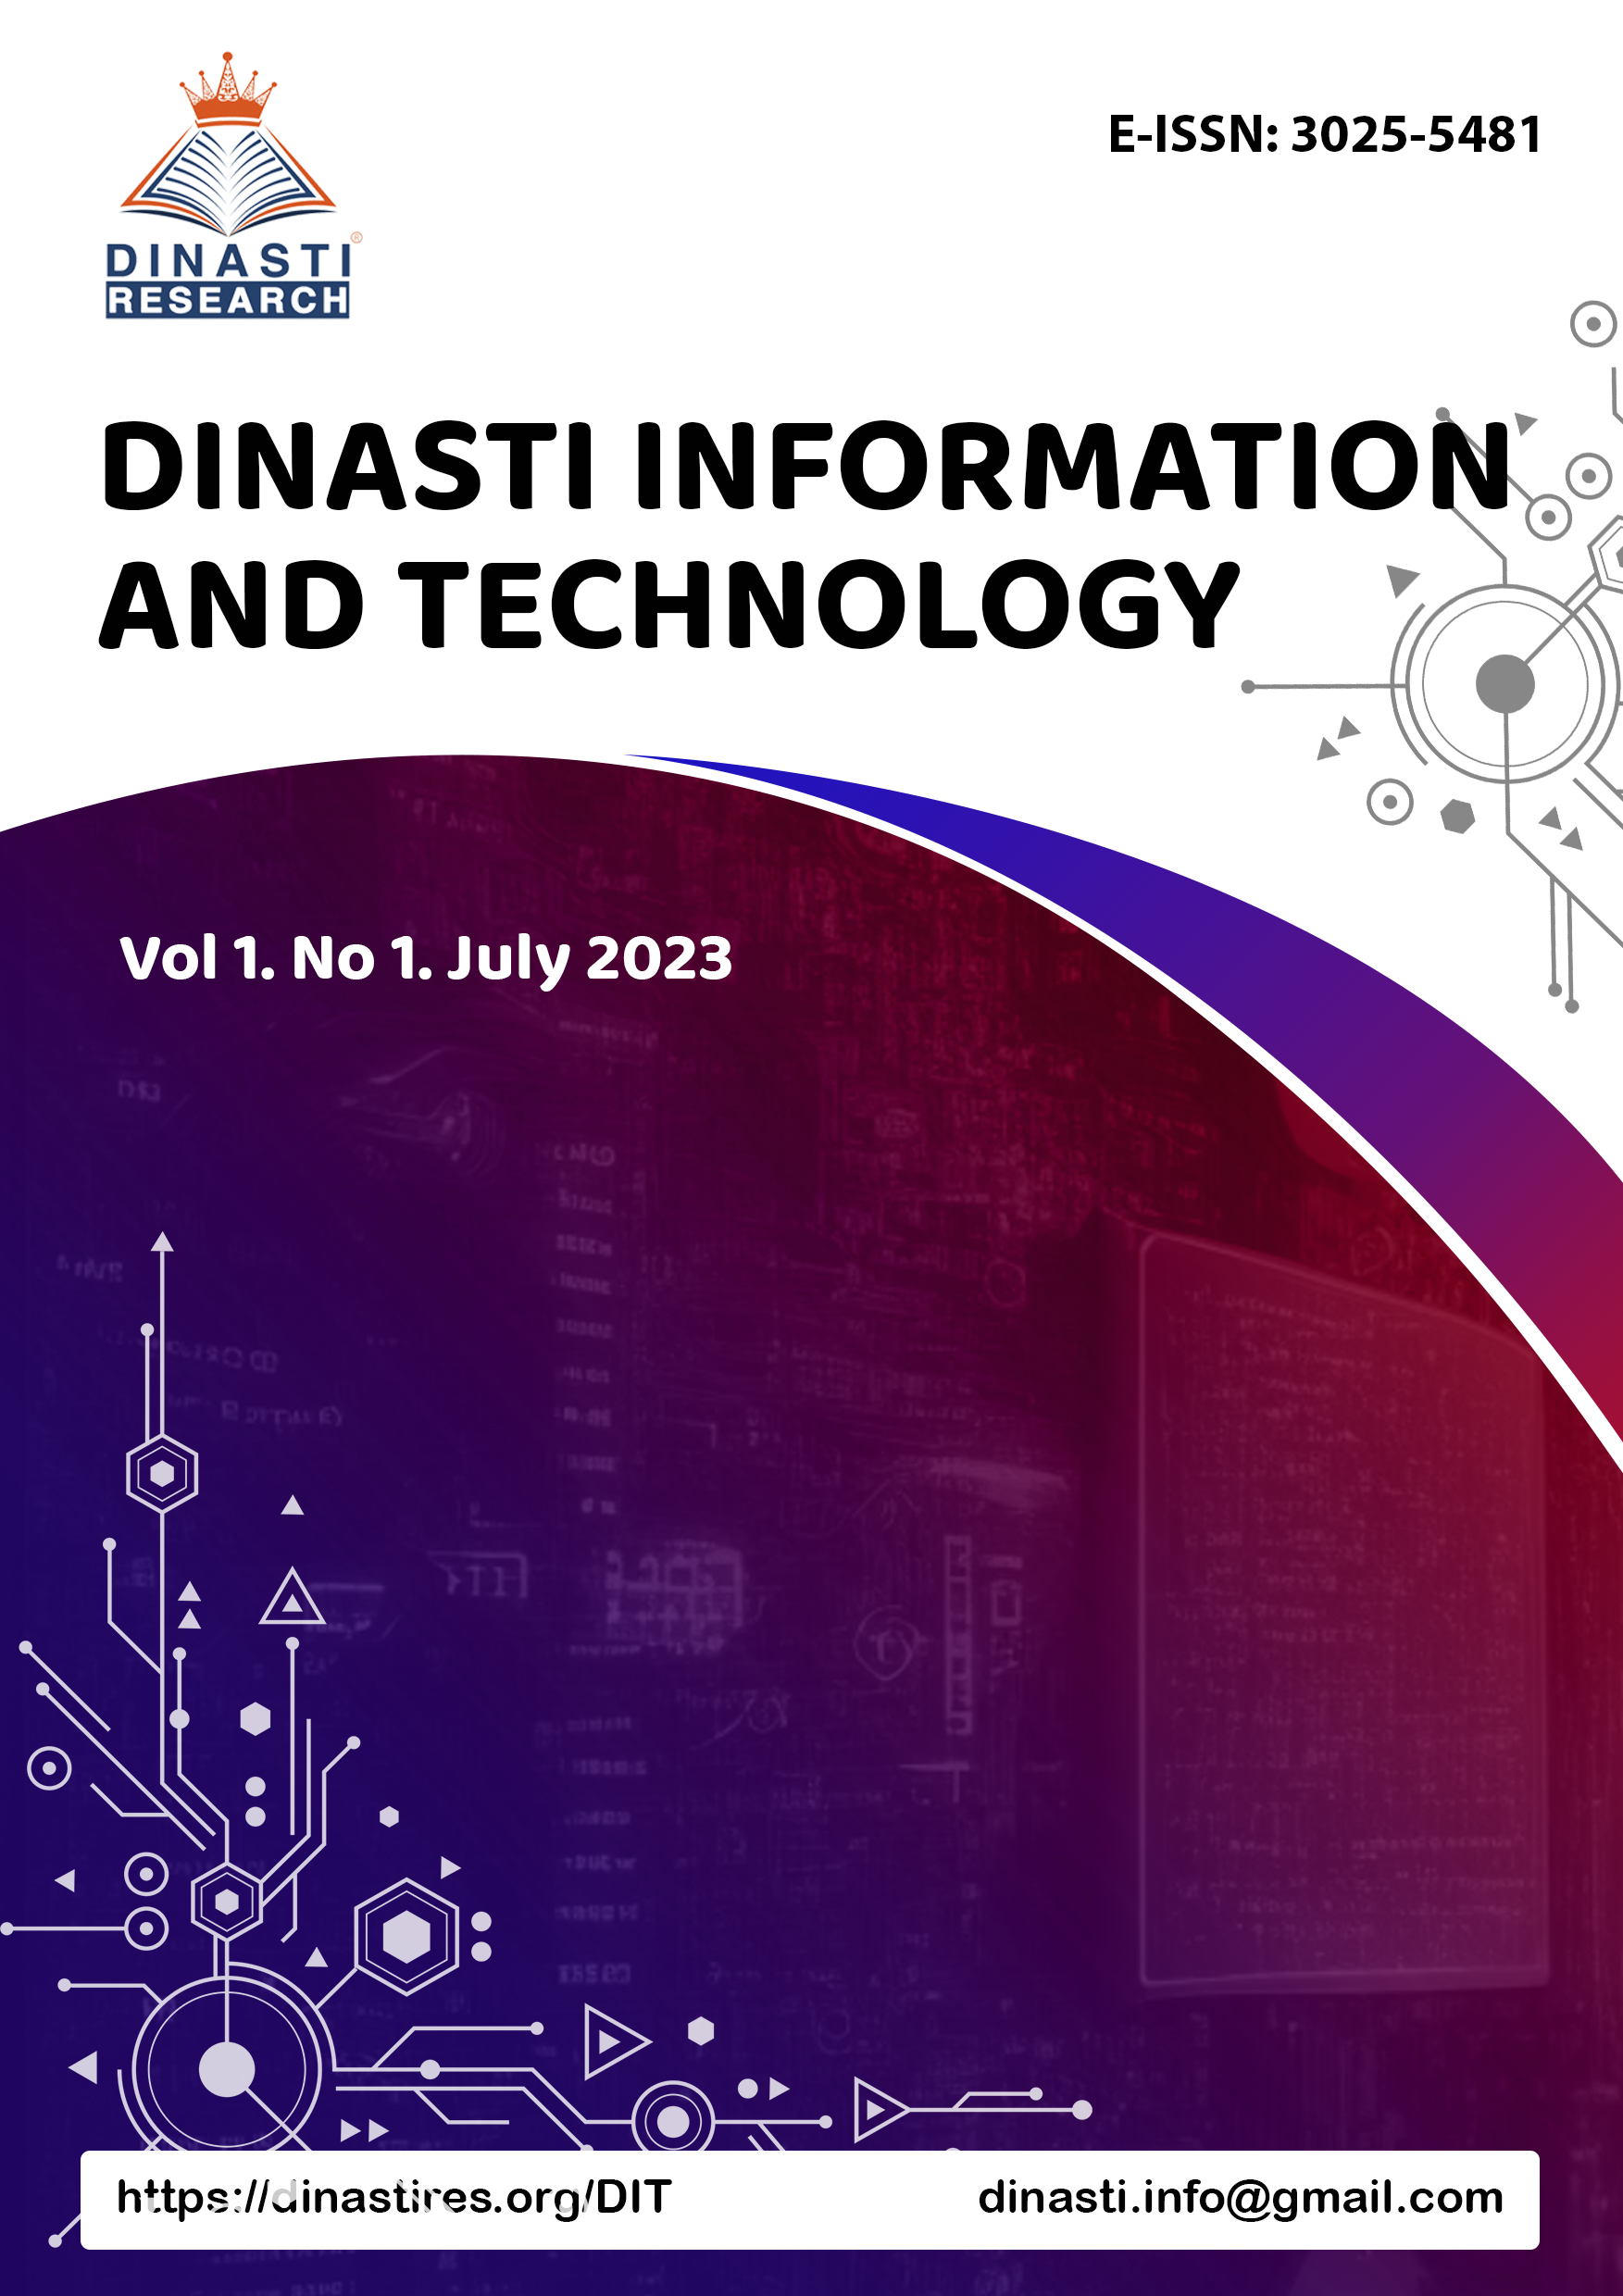 					View Vol. 1 No. 1 (2023): Dinasti Information and Technology (July 2023)
				